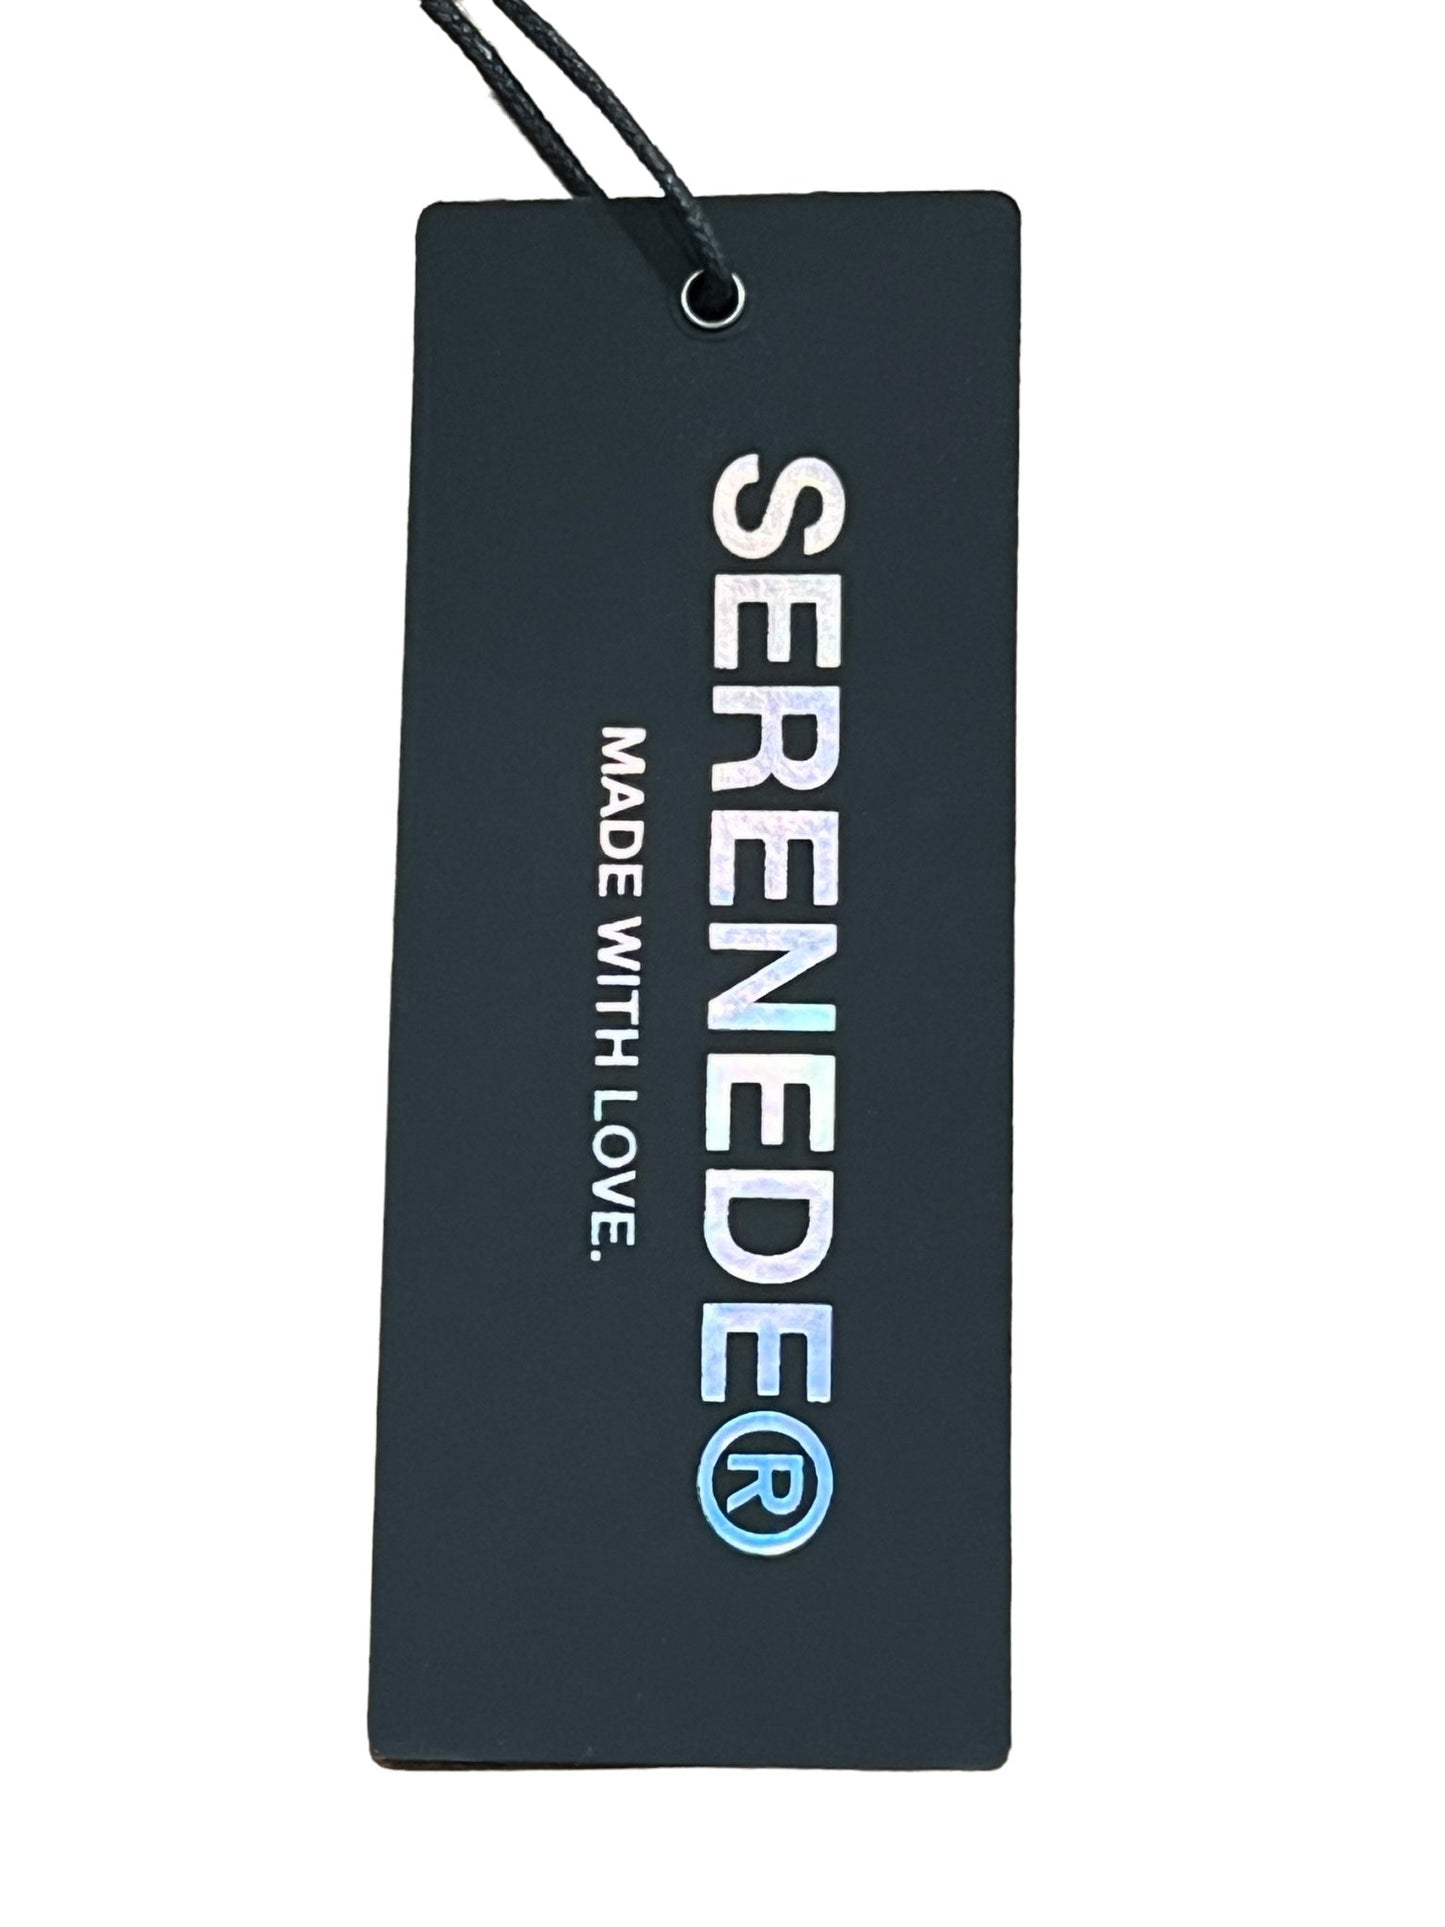 A black clothing tag with the word "SERENEDE TIMBER WOLF ARTIC GREY" printed in white, followed by "made with love" in smaller letters, isolated on a white background.